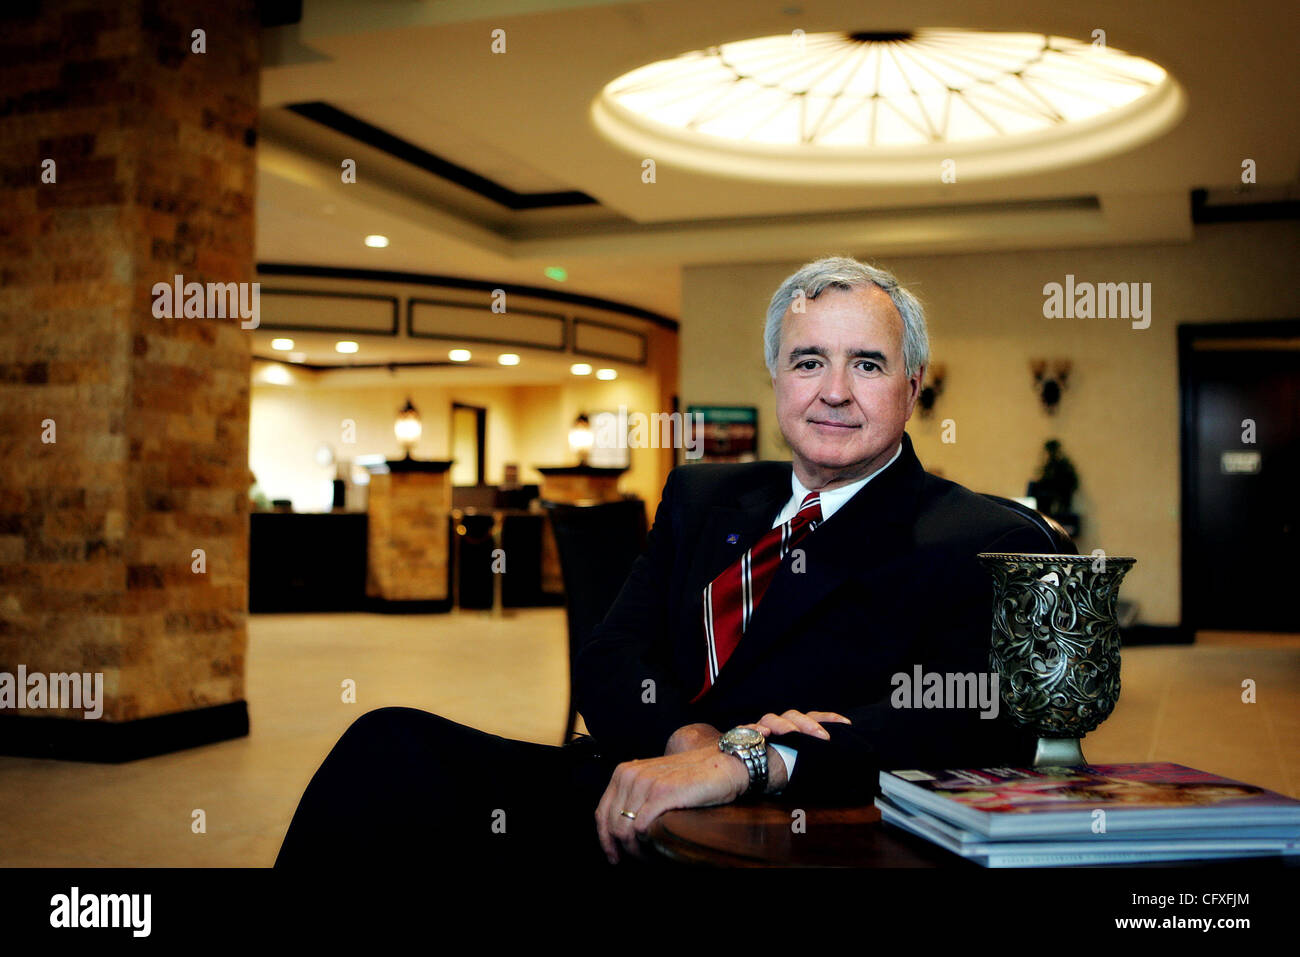 041207 biz Acosta Staff photo by Richard Graulich/The Palm Beach Post - 0036529A PALM BEACH GARDENS - Chic Acosta is the Executive Vice President of Residential Lending at Seacoast National Bank in Palm Beach Gardens.  For business Moving Up feature. Stock Photo